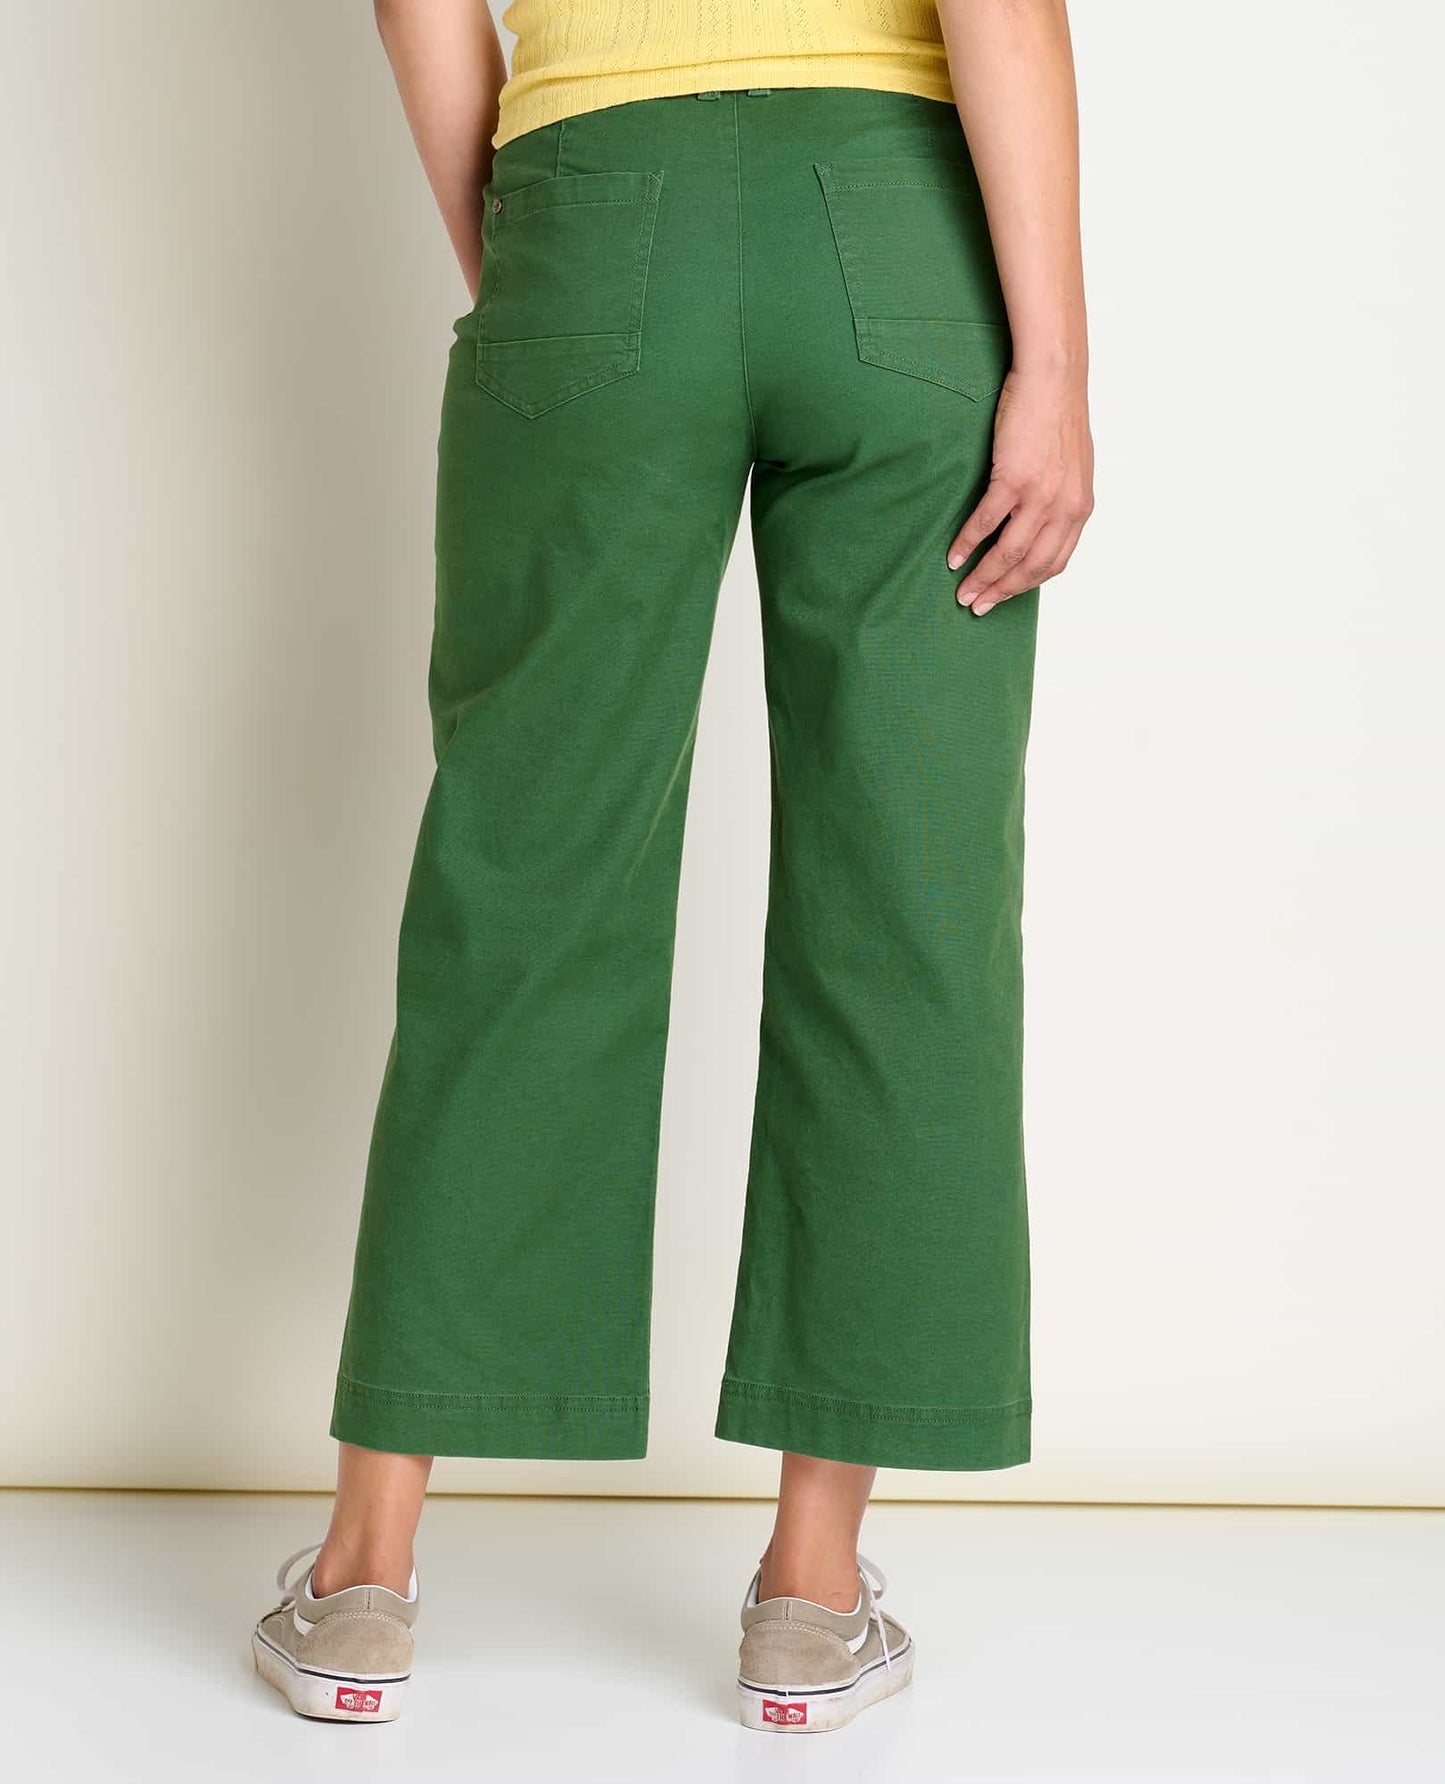 Toad & Co. Earthworks Wide Leg Pant